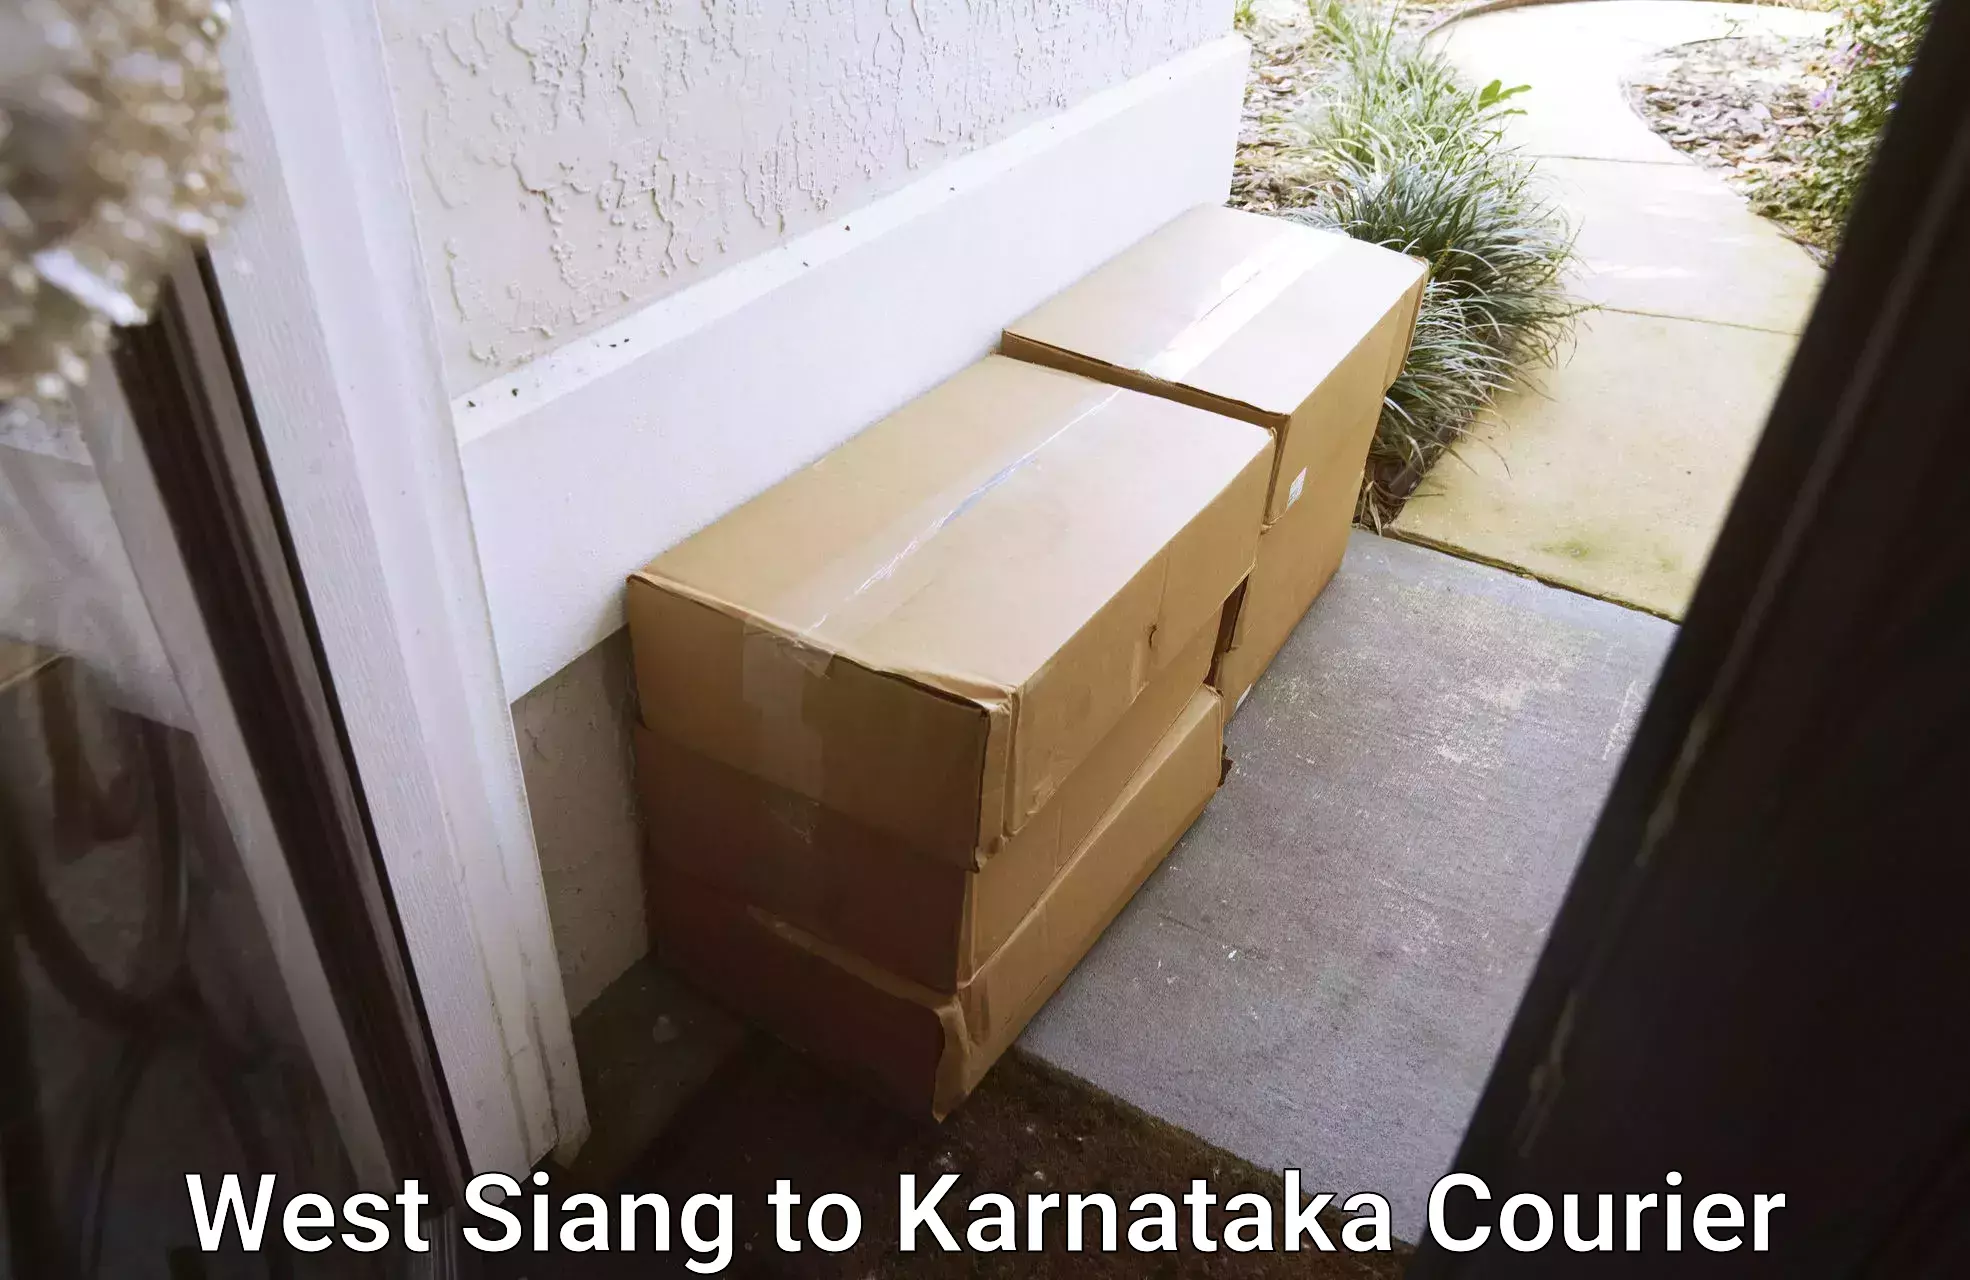 Professional courier services West Siang to Mysore